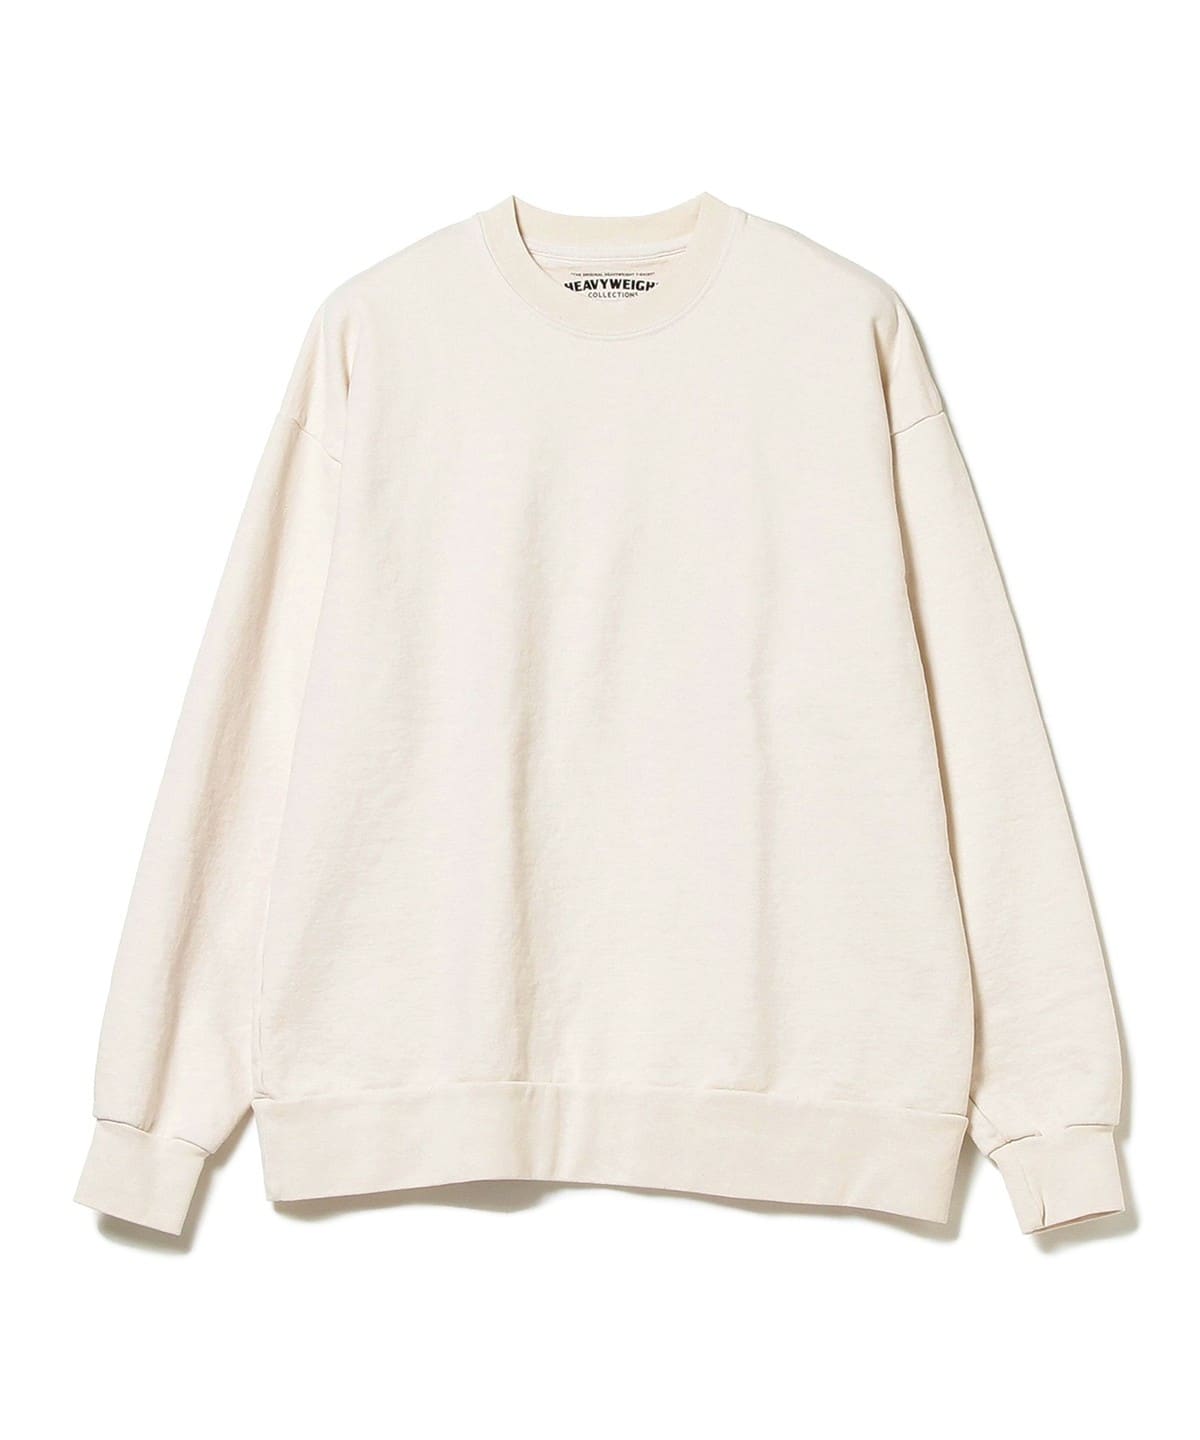 BEAMS T BEAMS T HEAVYWEIGHT COLLECTIONS / 14.5oz CREW NECK (tops